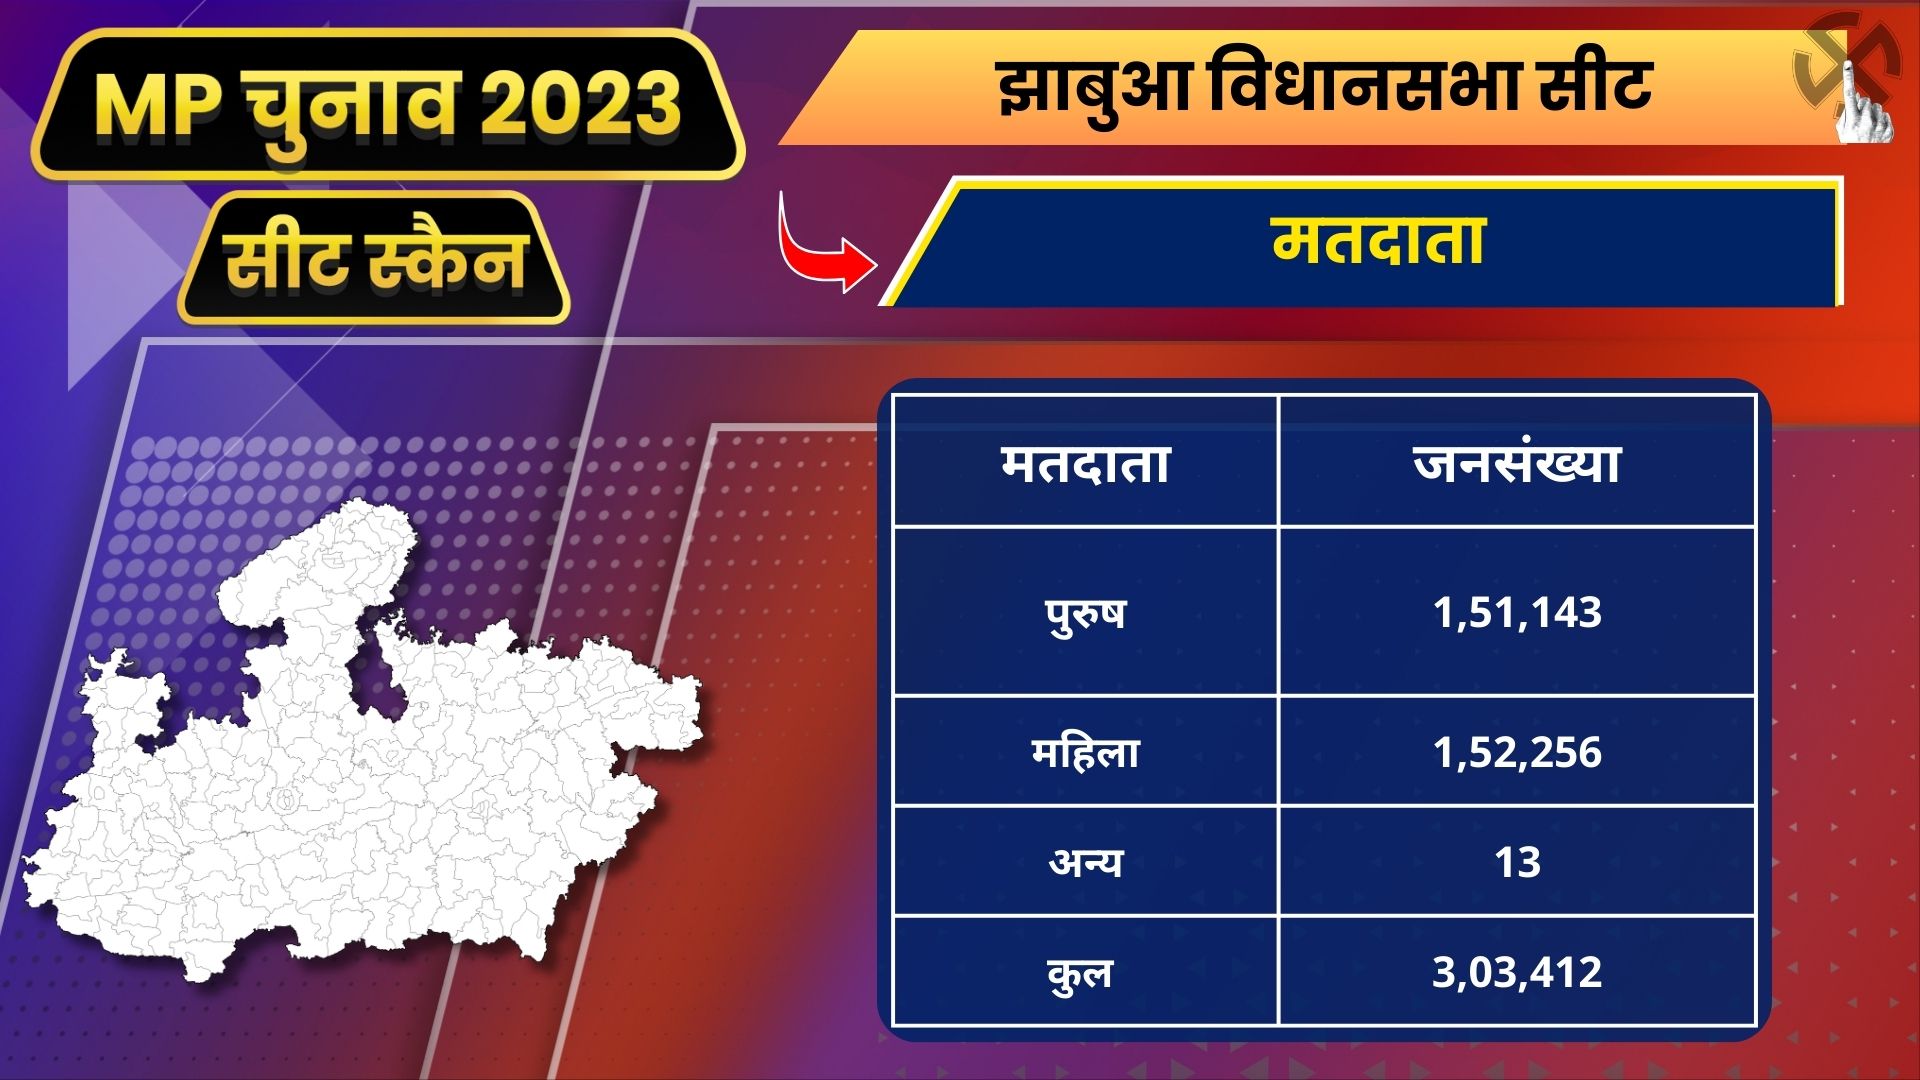 Number of voters in Jhabua assembly